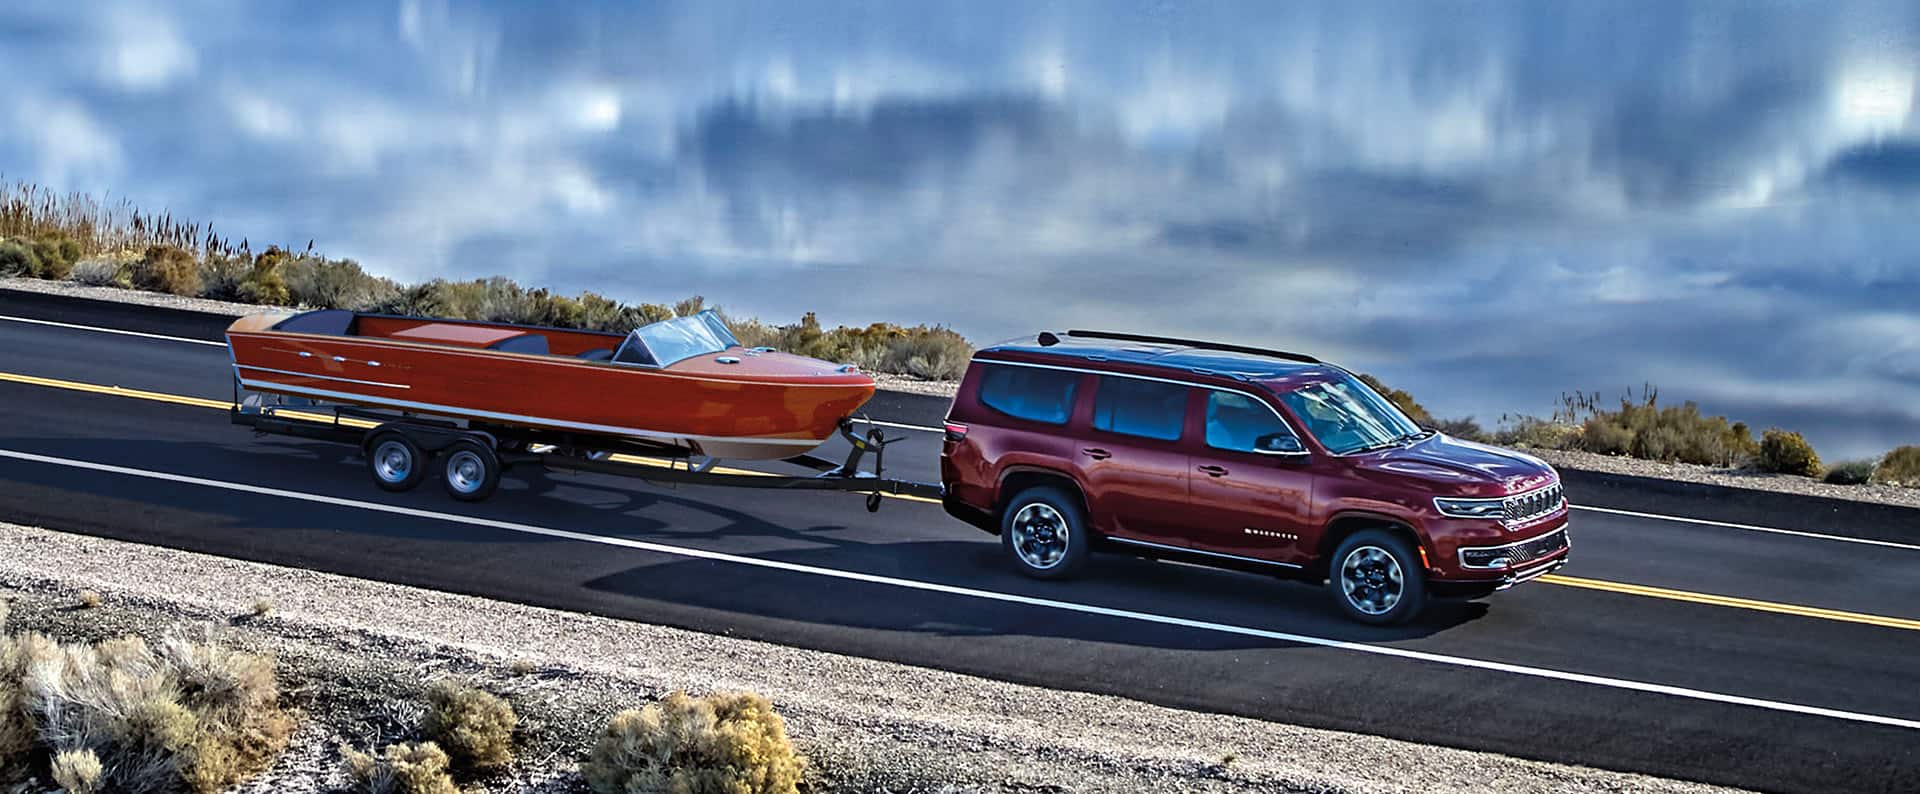 The 2024 Wagoneer Series III towing a motorboat on a lakeside road, with storm clouds overhead.